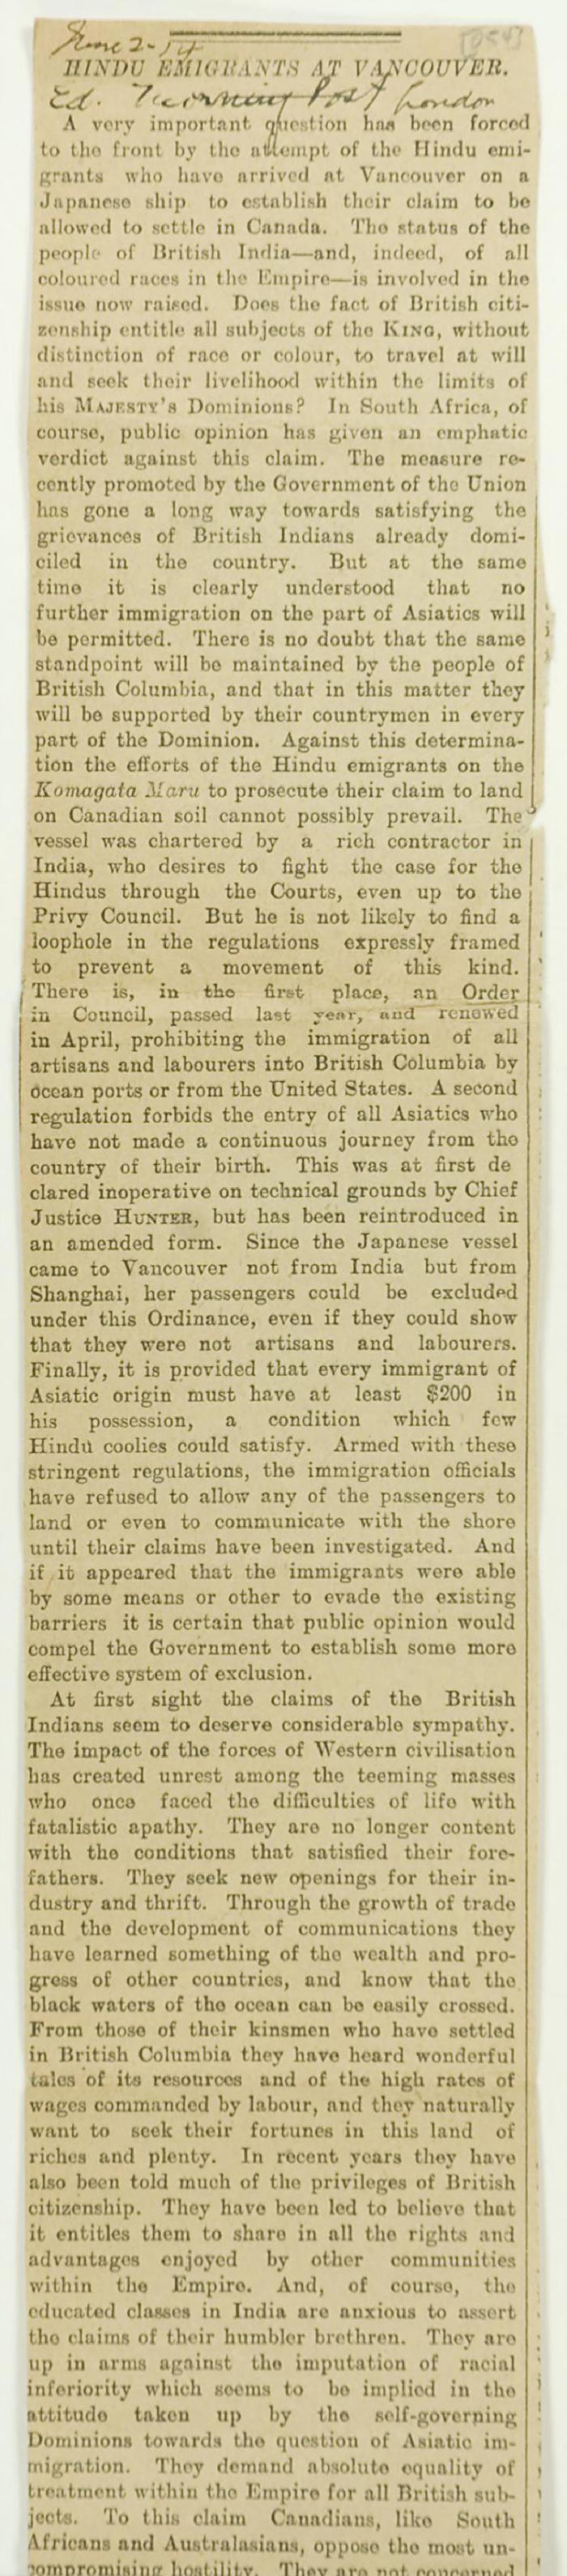 Newsclipping - Hindu emigrants at Vancouver